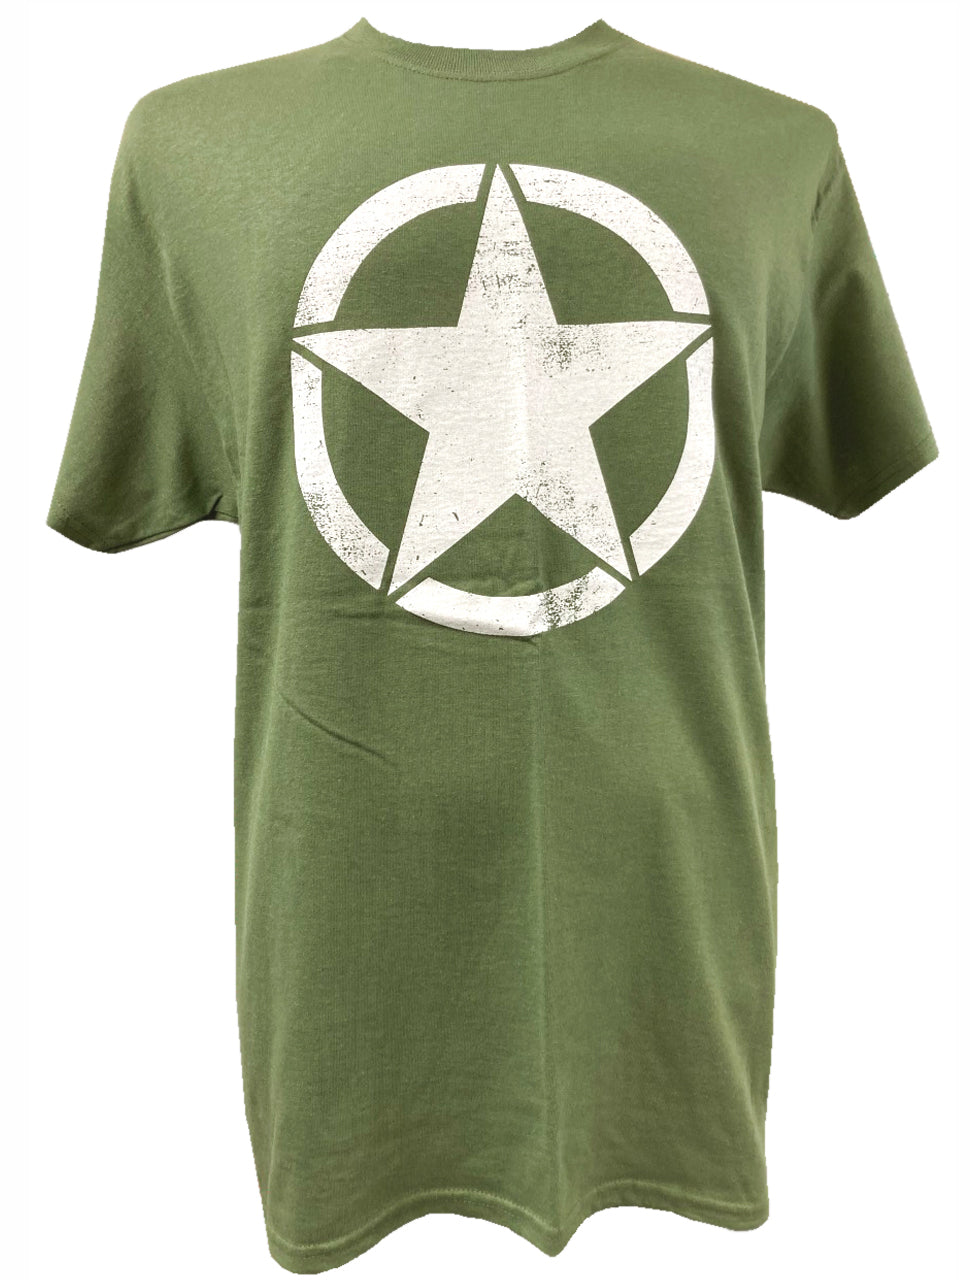 US Army White Star (Front Print) T-shirt  LIMITED AVAILABILITY - WHEN IT'S GONE IT'S GONE!